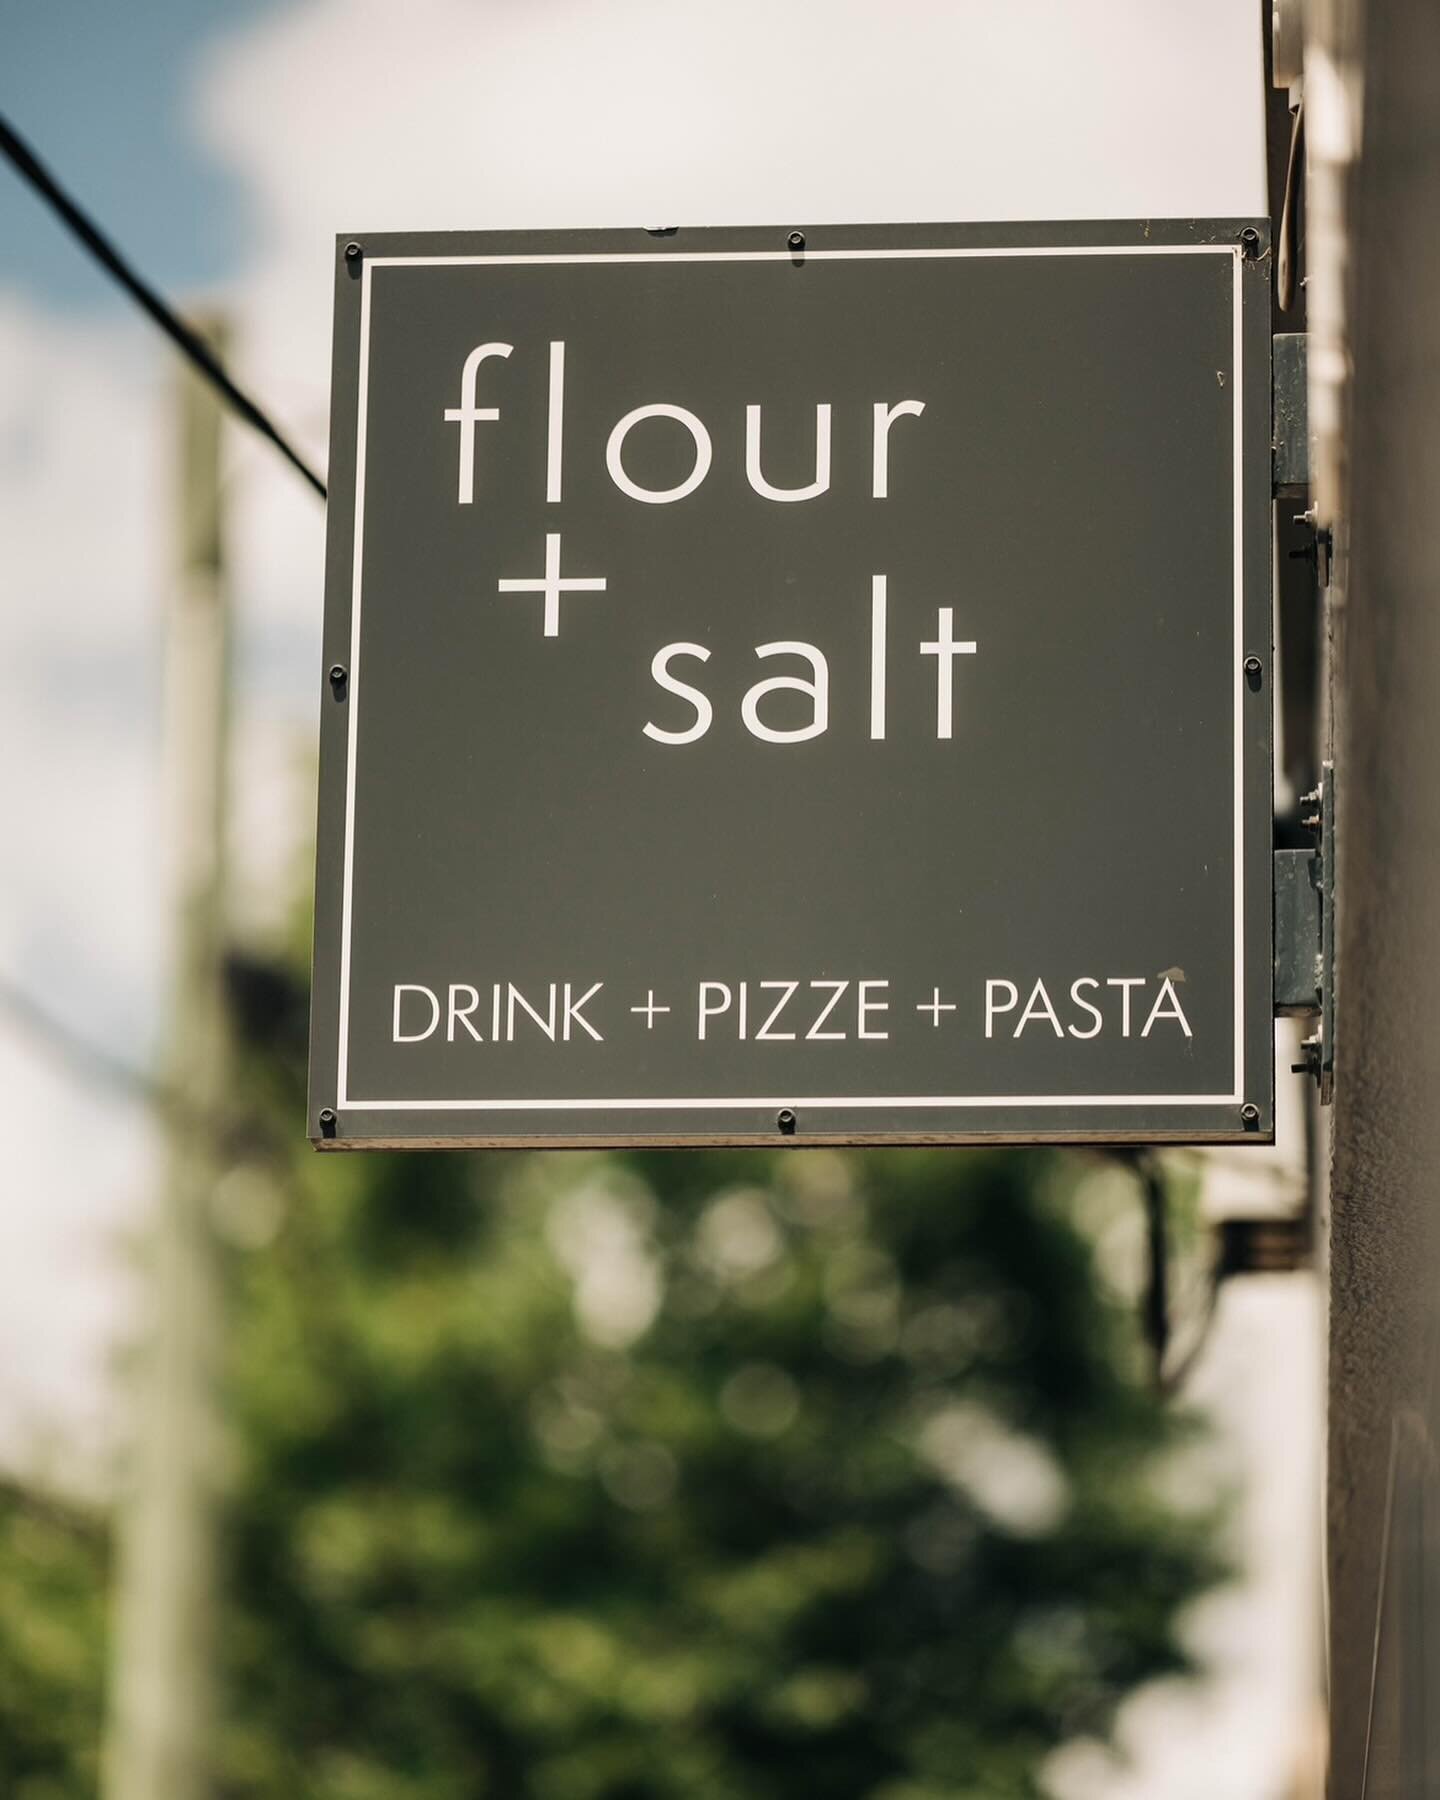 At Flour+Salt, we have built a reputation for dining excellence from our gourmet pizzas and our finest house made pastas with over 20 years experience in hospitality. 

We would like to invite you to join our passion for food. 

Reservations:
📧 info